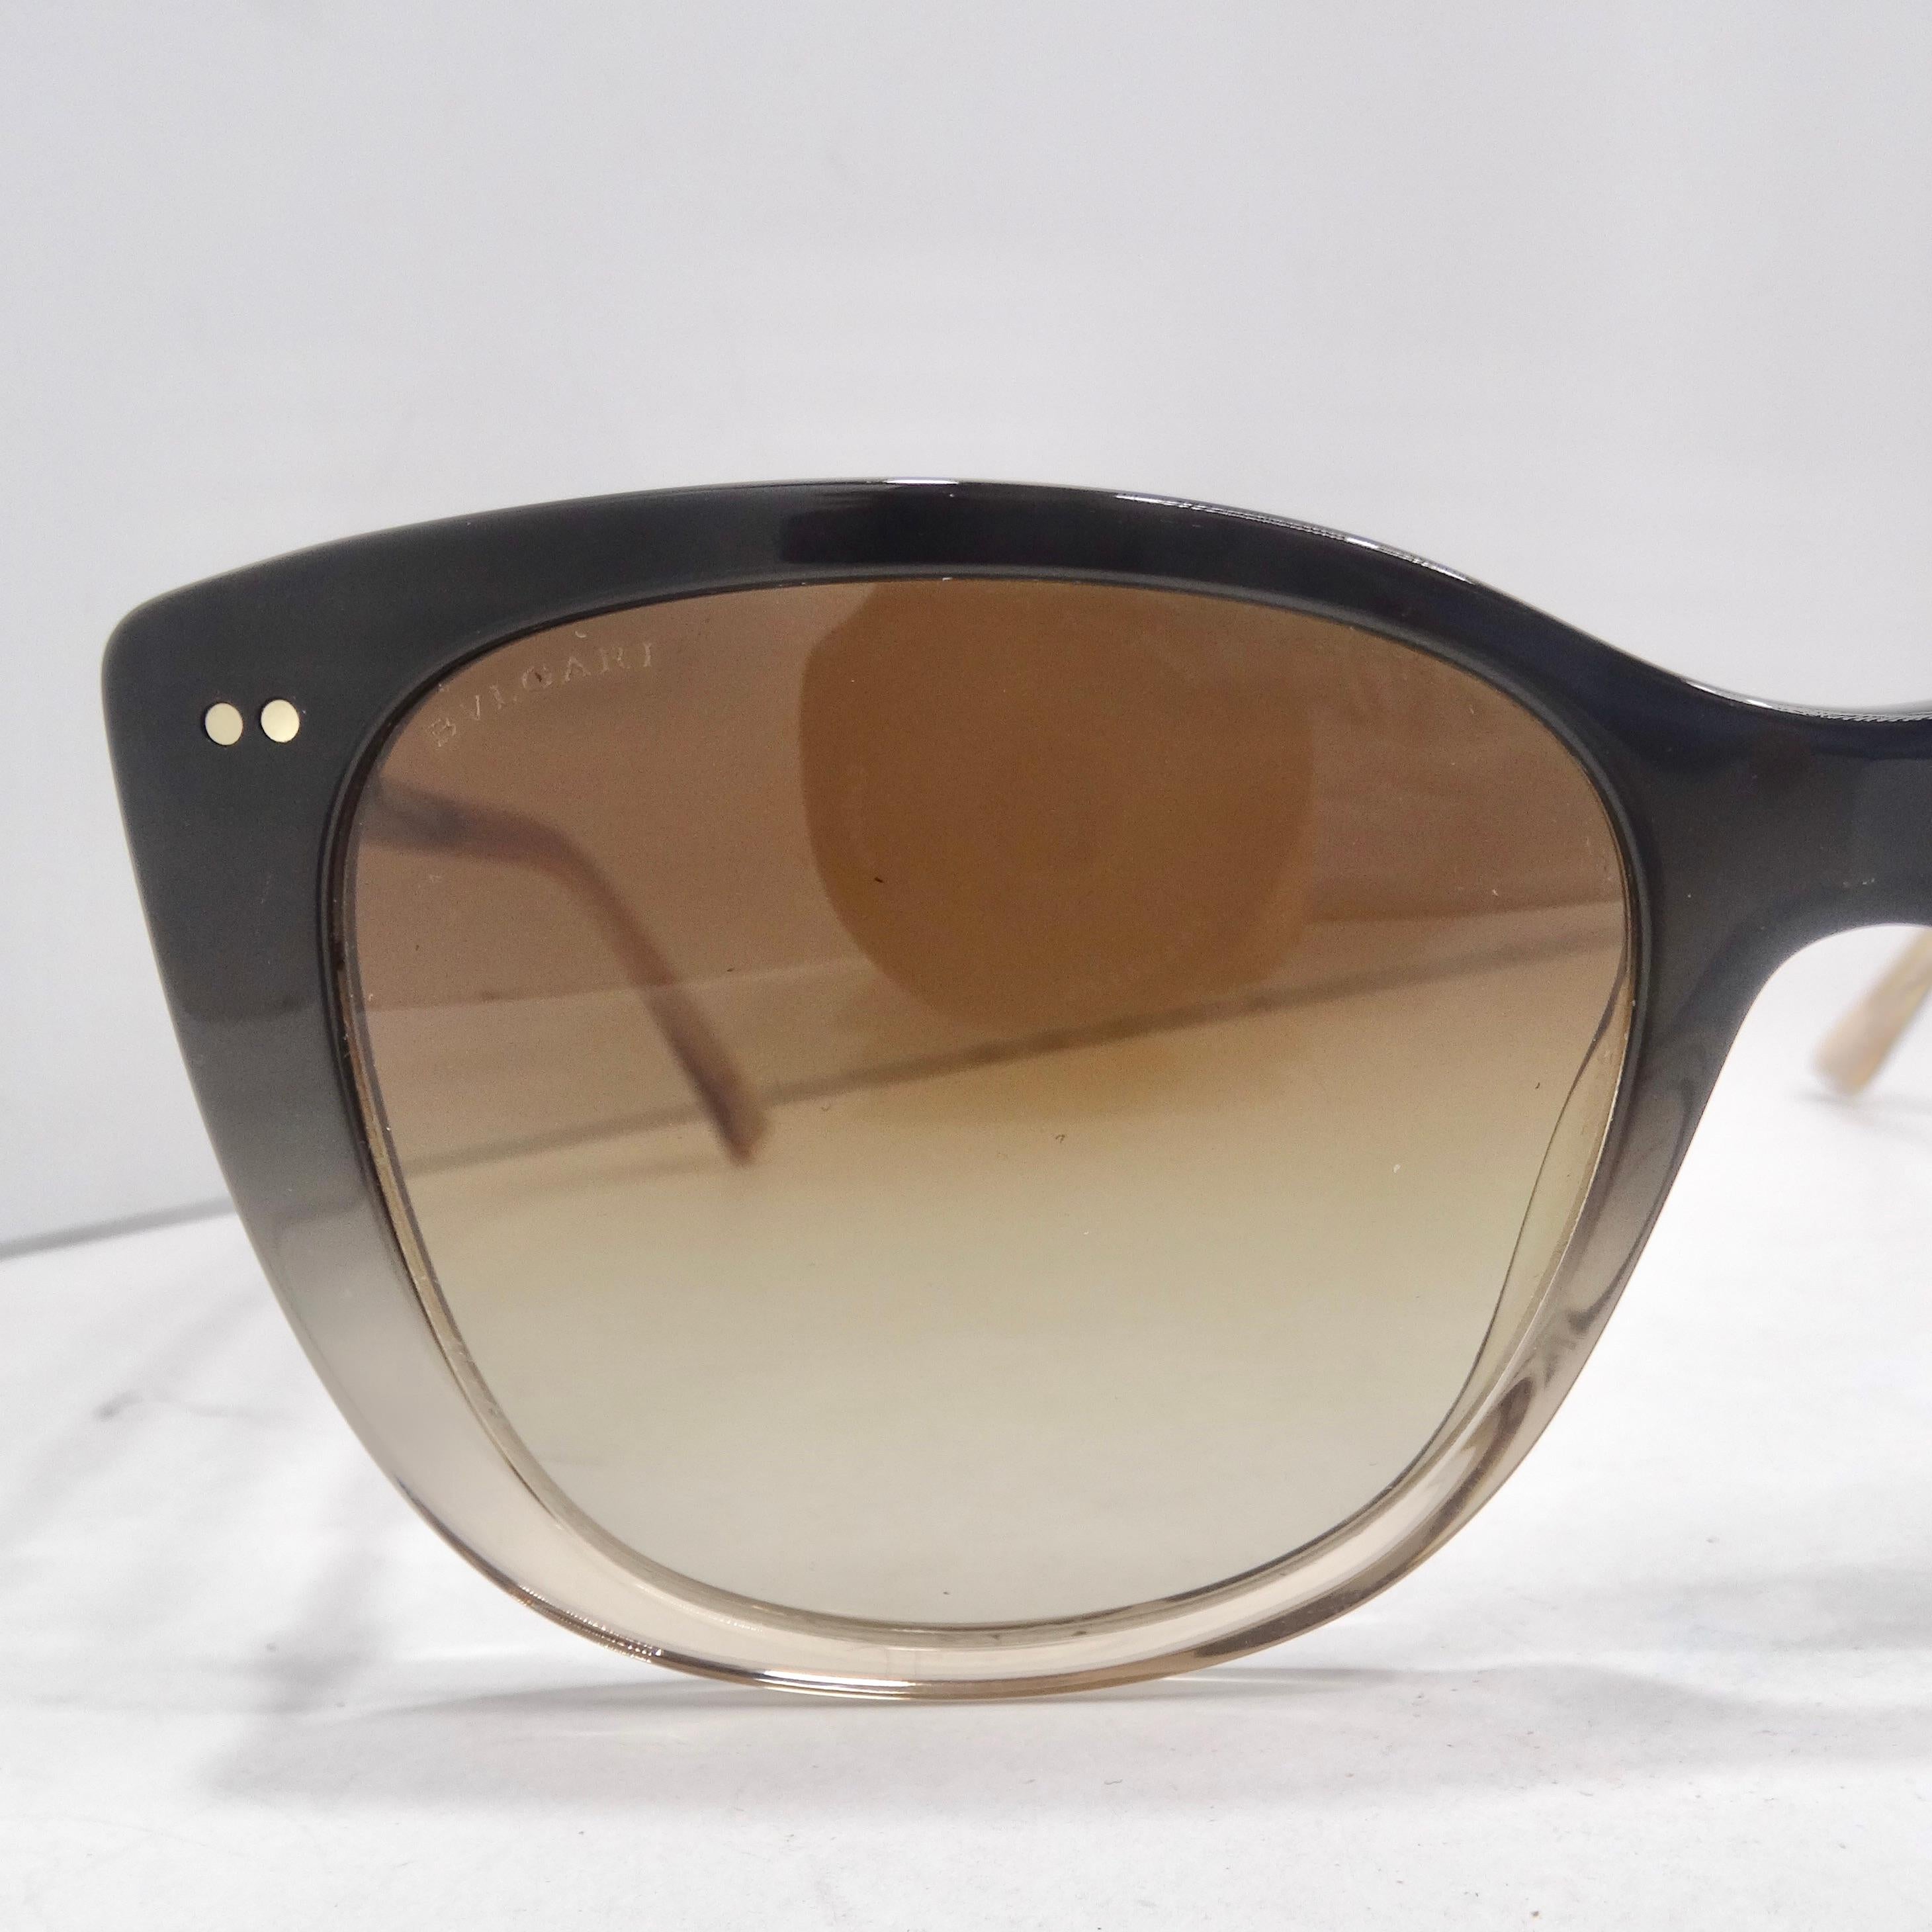 Introducing the Bvlgari 8220F Sunglasses in Black Brown Gradient – a stunning combination of luxury, versatility, and timeless design. These square-frame sunglasses from Bvlgari are not just an accessory; they are a statement piece that effortlessly